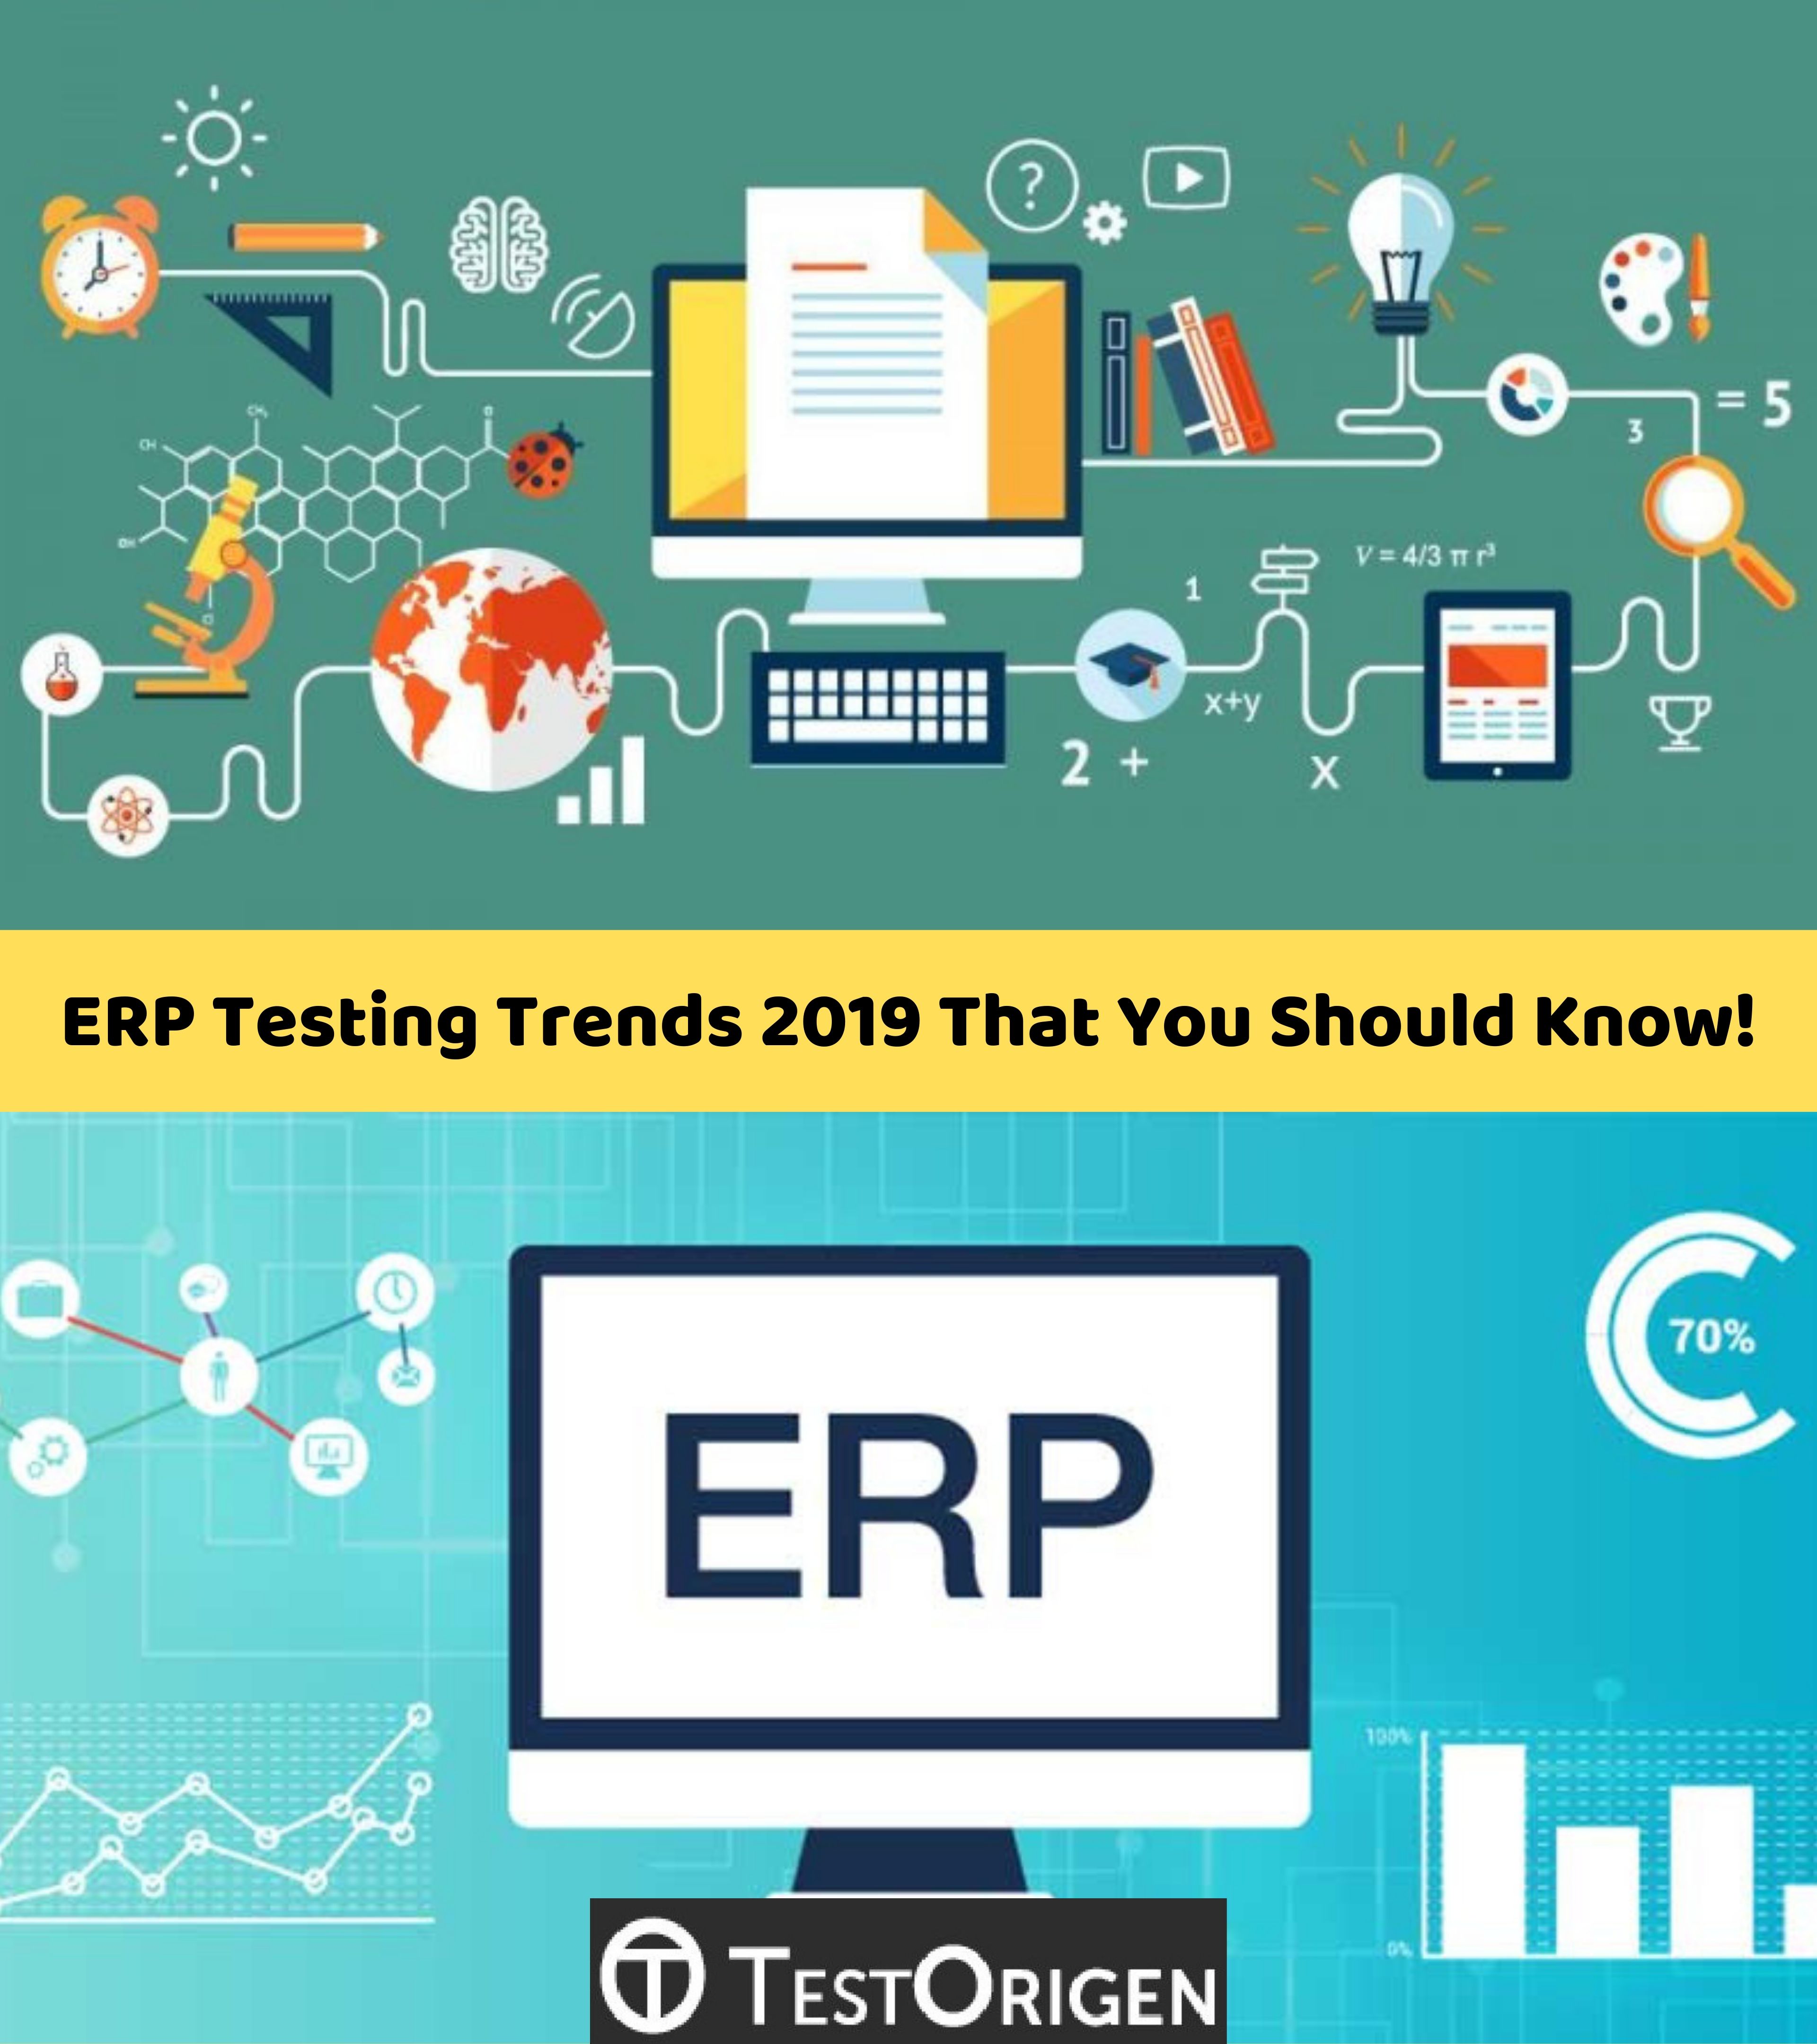 ERP Testing Trends 2019 That You Should Know!